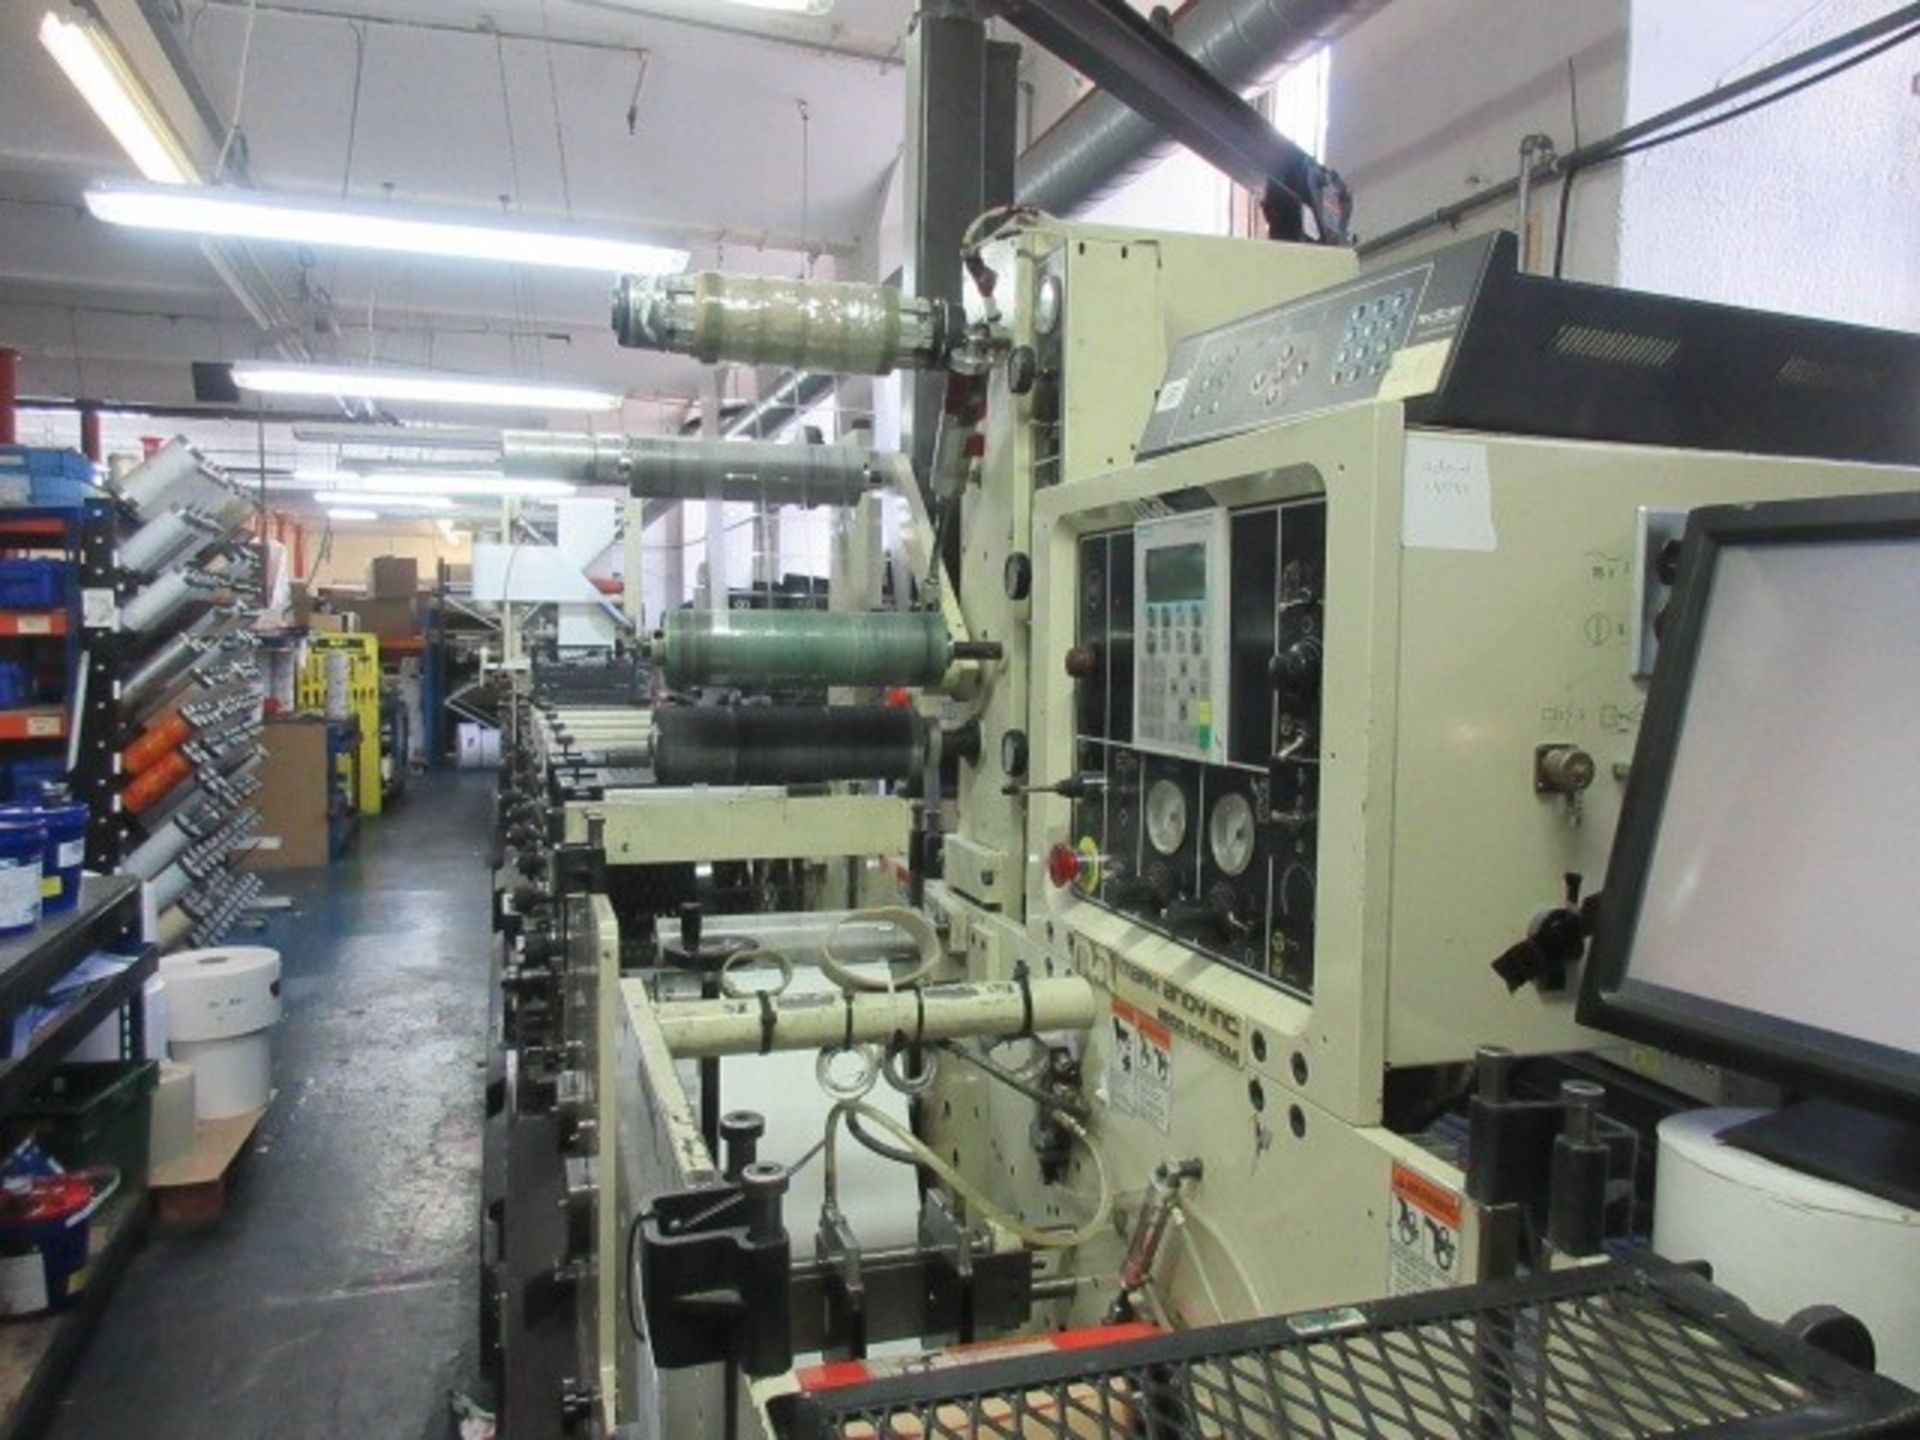 Mark Andy 2200-10F 10” 8 colour flexographic label printing press. Serial no: 1260086 (2002) - Image 248 of 383